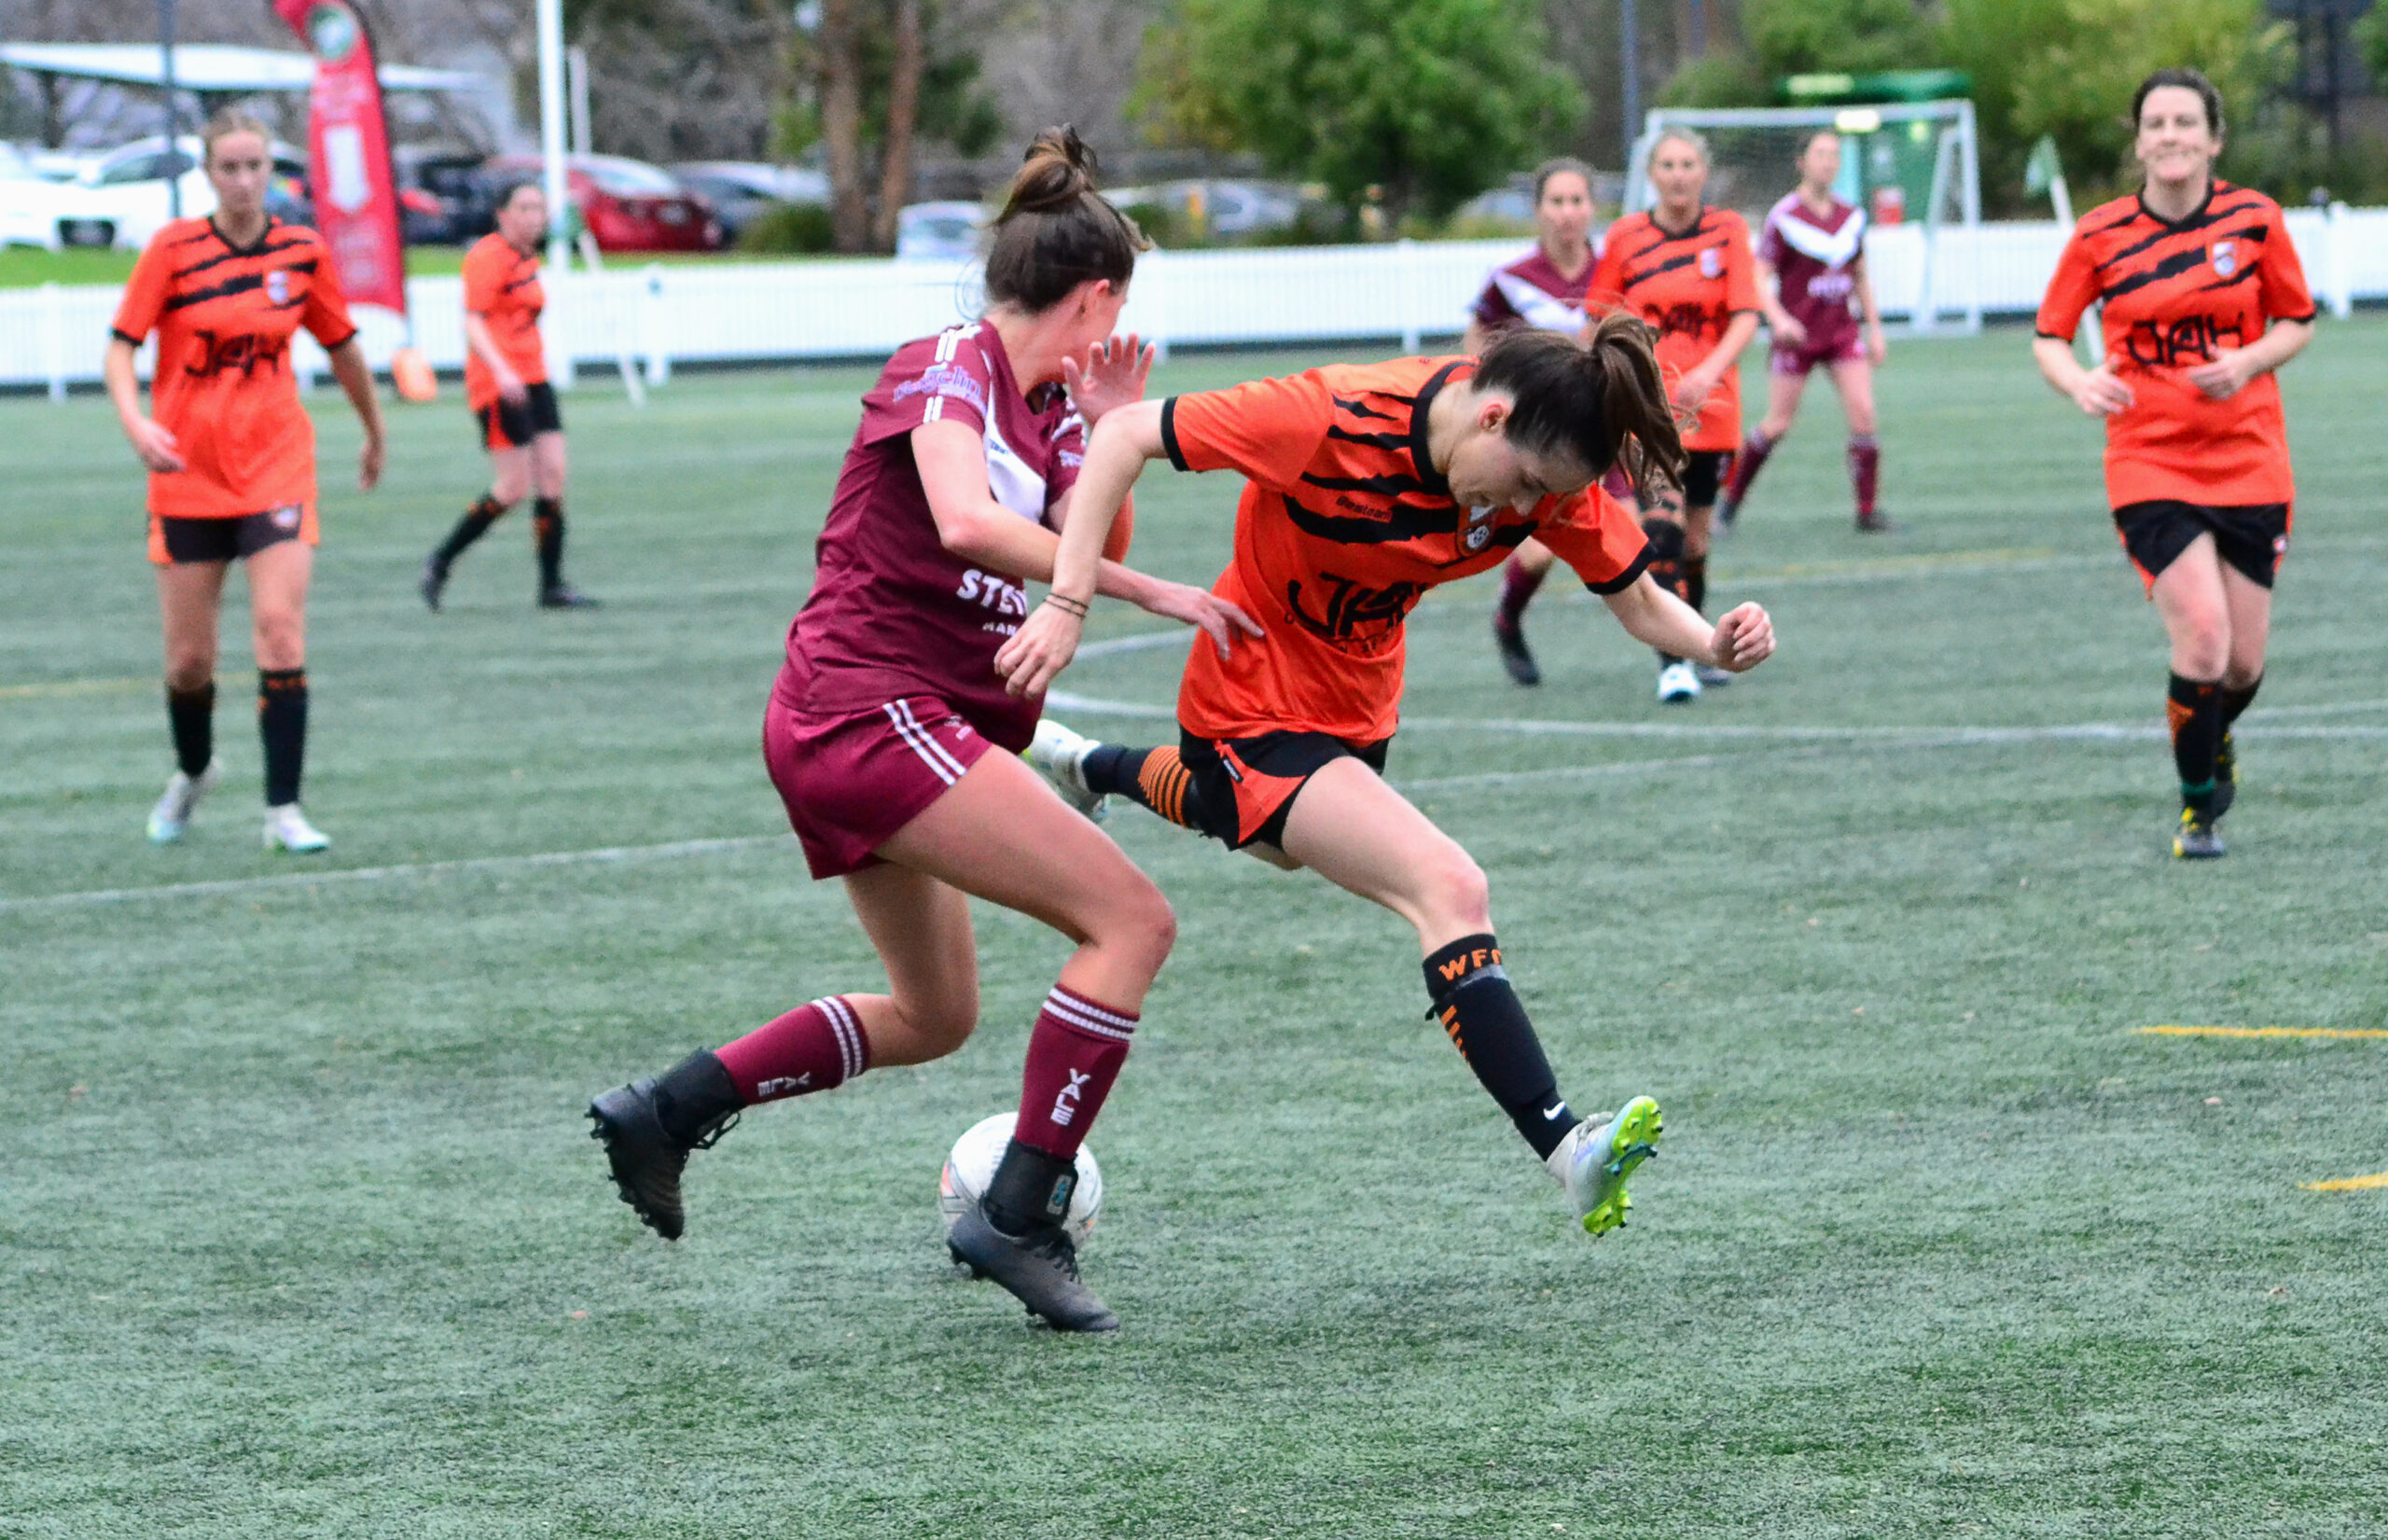 Action from the 2023 MWFA Women's Premier League Round 13 game between Wakehurst and Manly Vale. Photo credit: Graeme Bolton